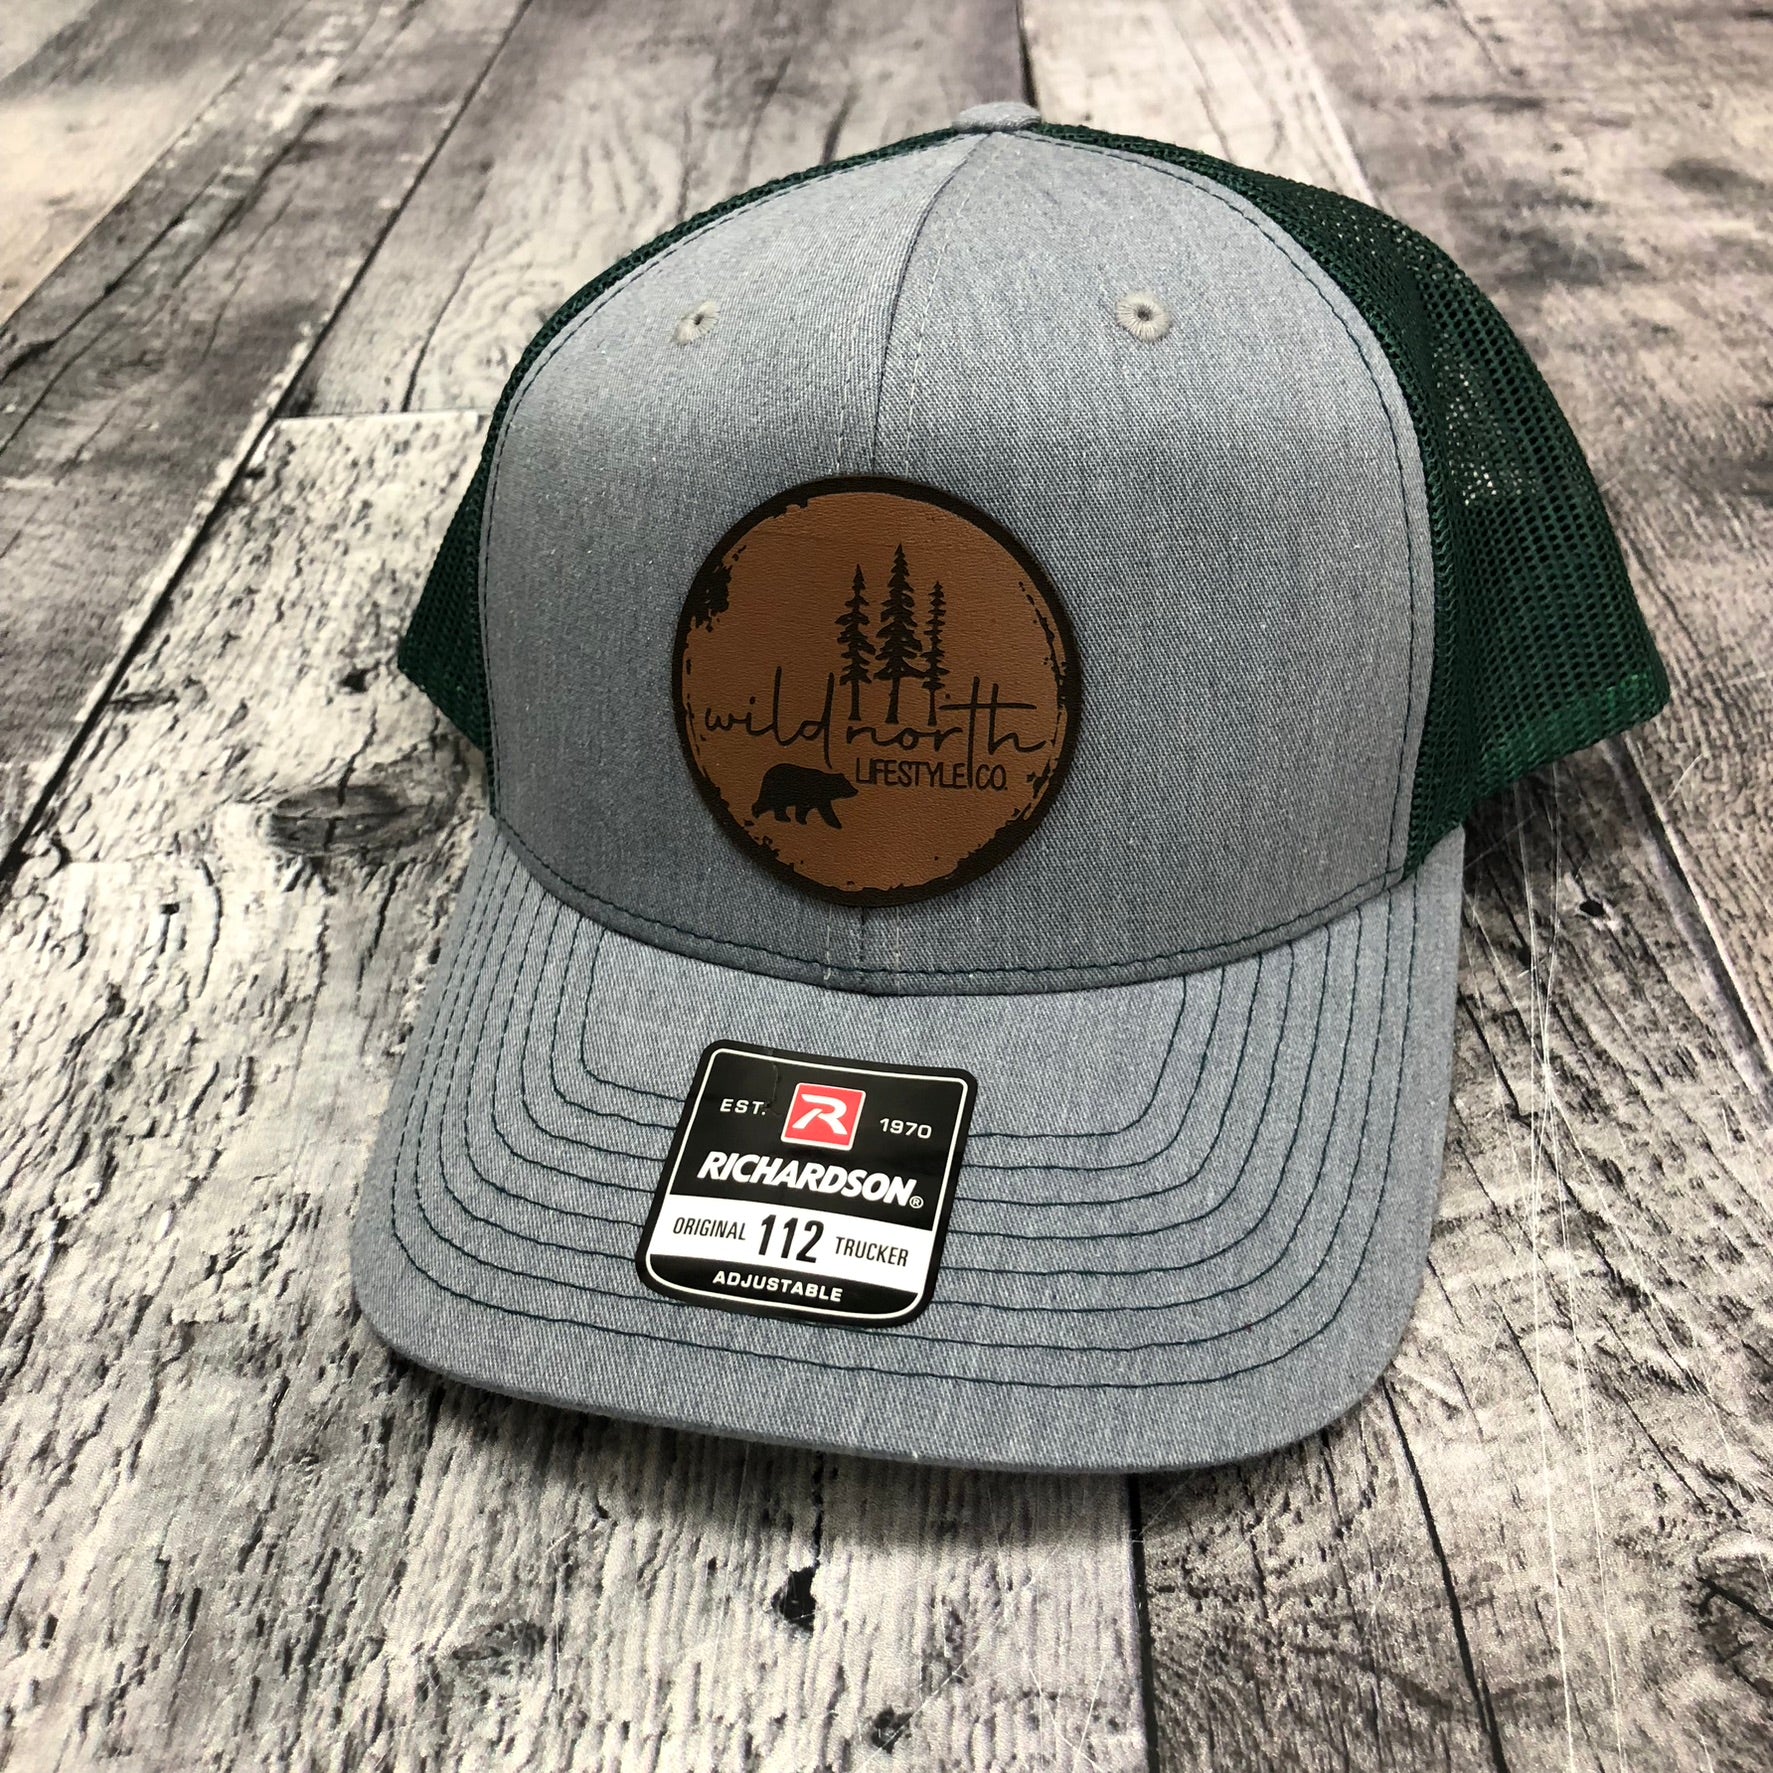 Wild North Retro Trucker Mesh Snapback - Leather Patch on Grey (forest)